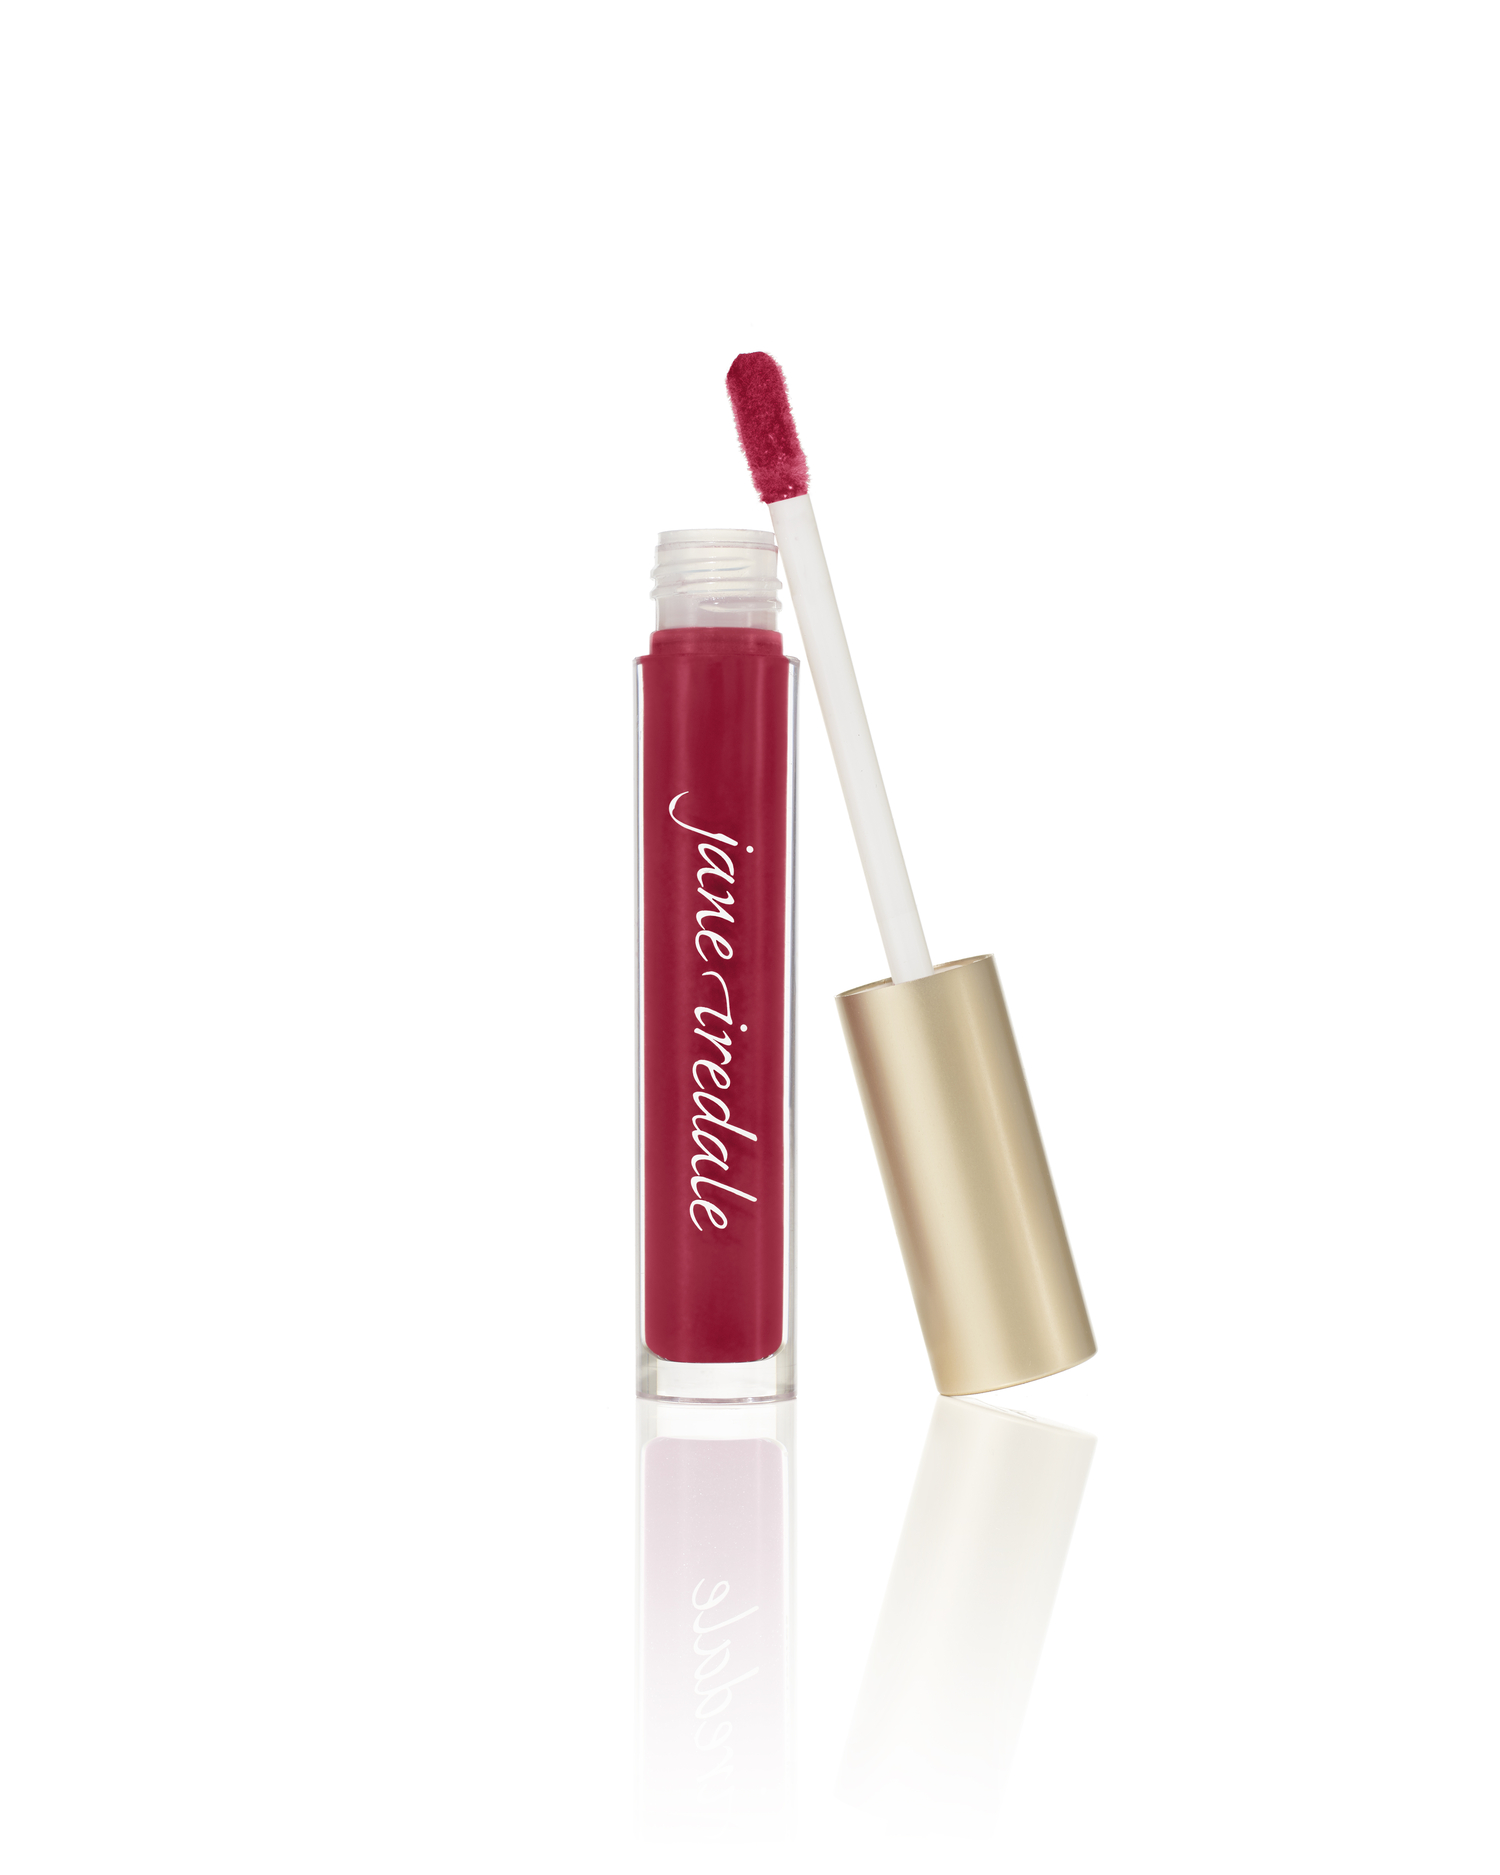 HYDROPURE™ HYALURONIC LIP GLOSS – BERRY RED